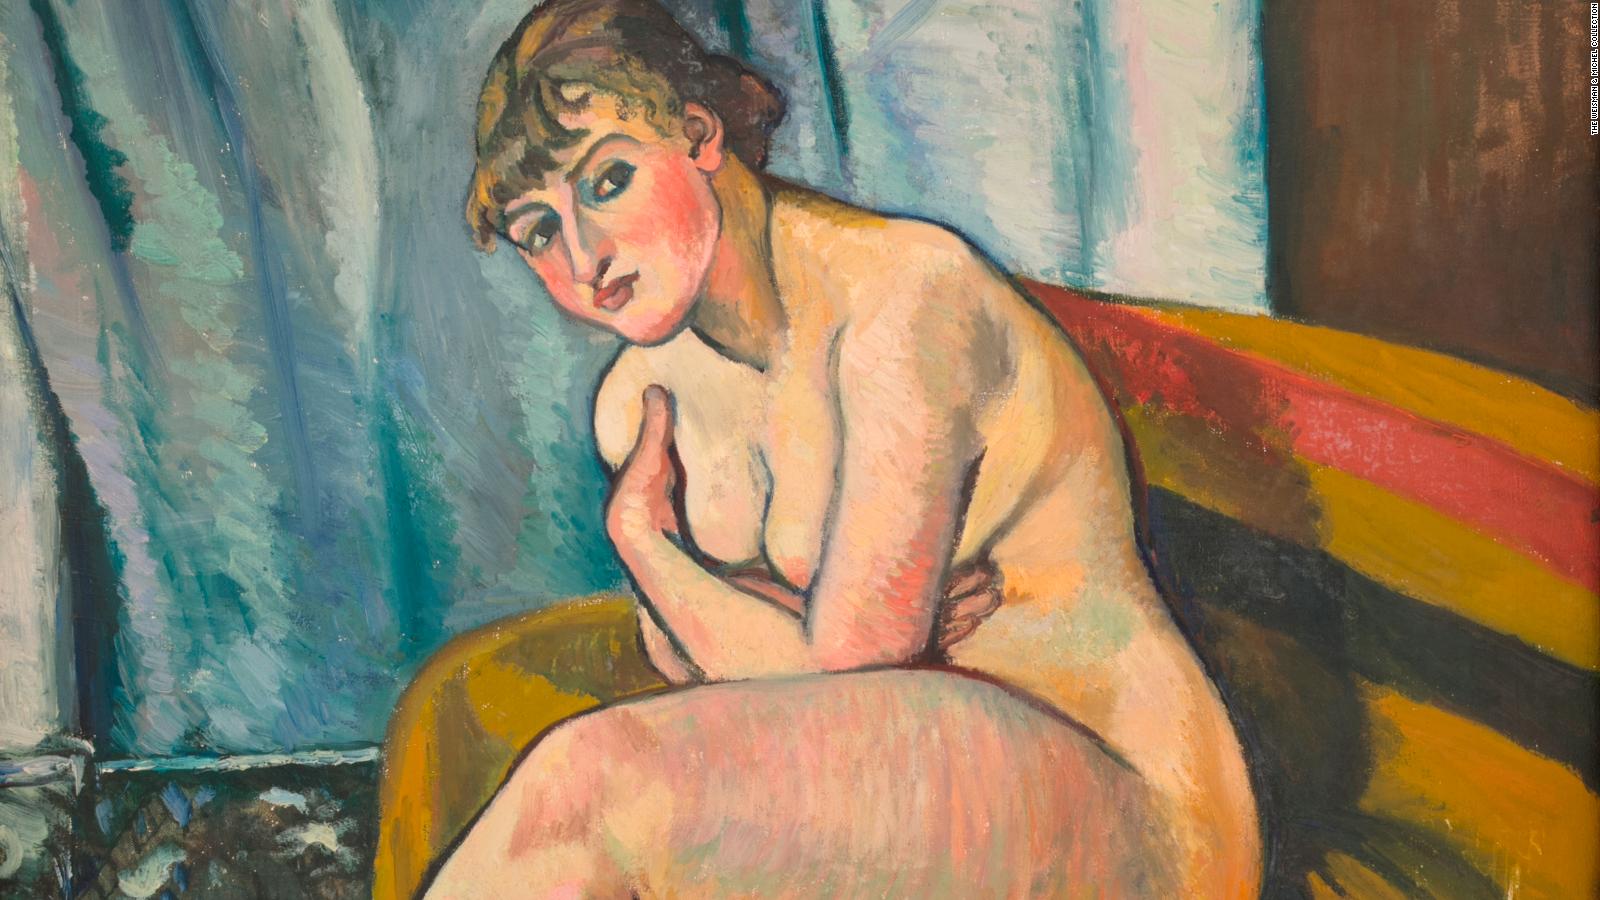 Sexy sport nude girl painting - Sex archive